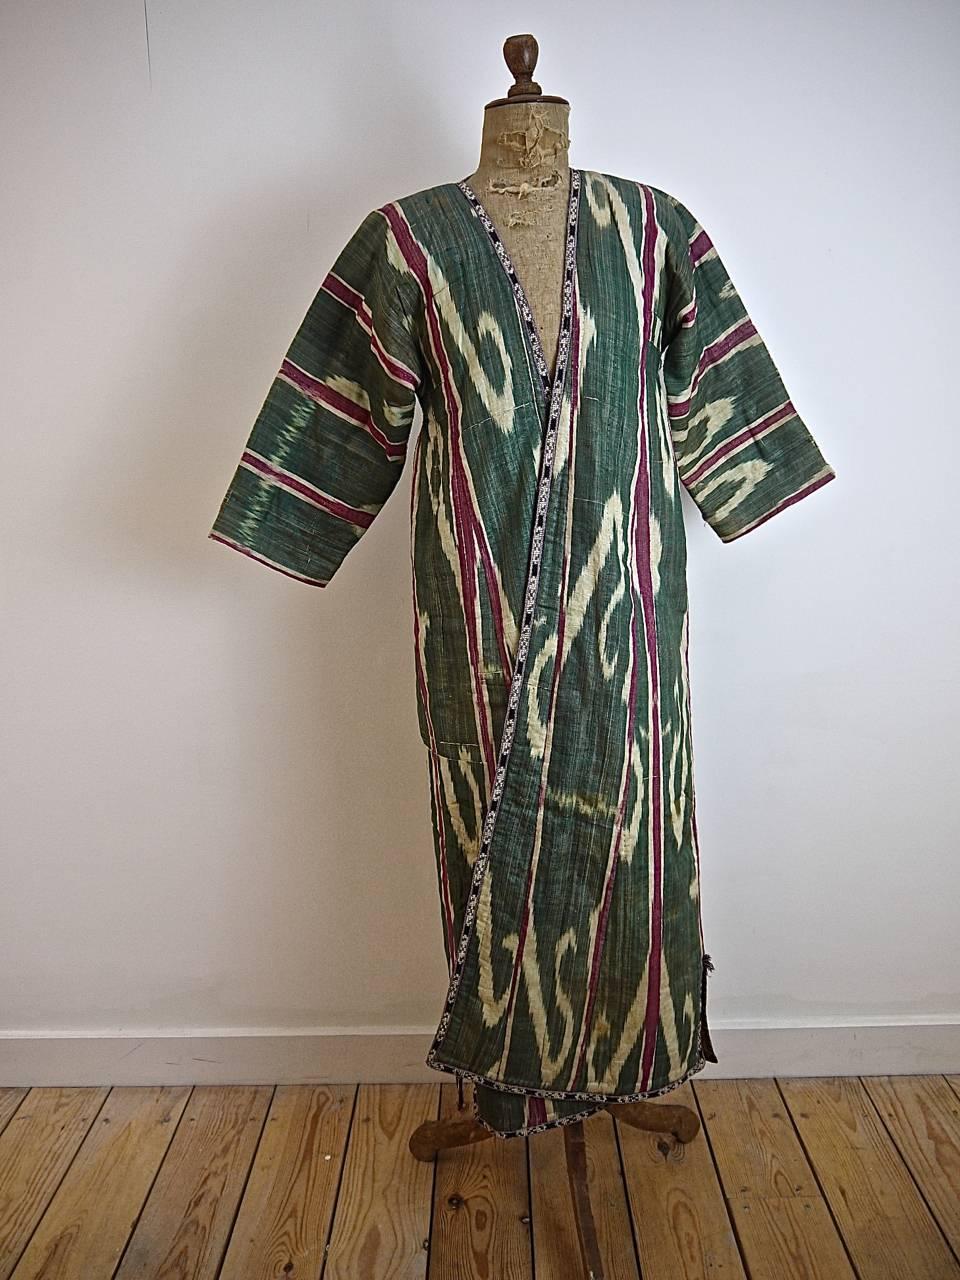 Late 19th or early 20th century silk chapan or robe from Uzbekistan with a red cotton floral print Russian lining. Lightly quilted with a wool padding.
Neck to hem 126cm
Across the chest 50 cm wide.